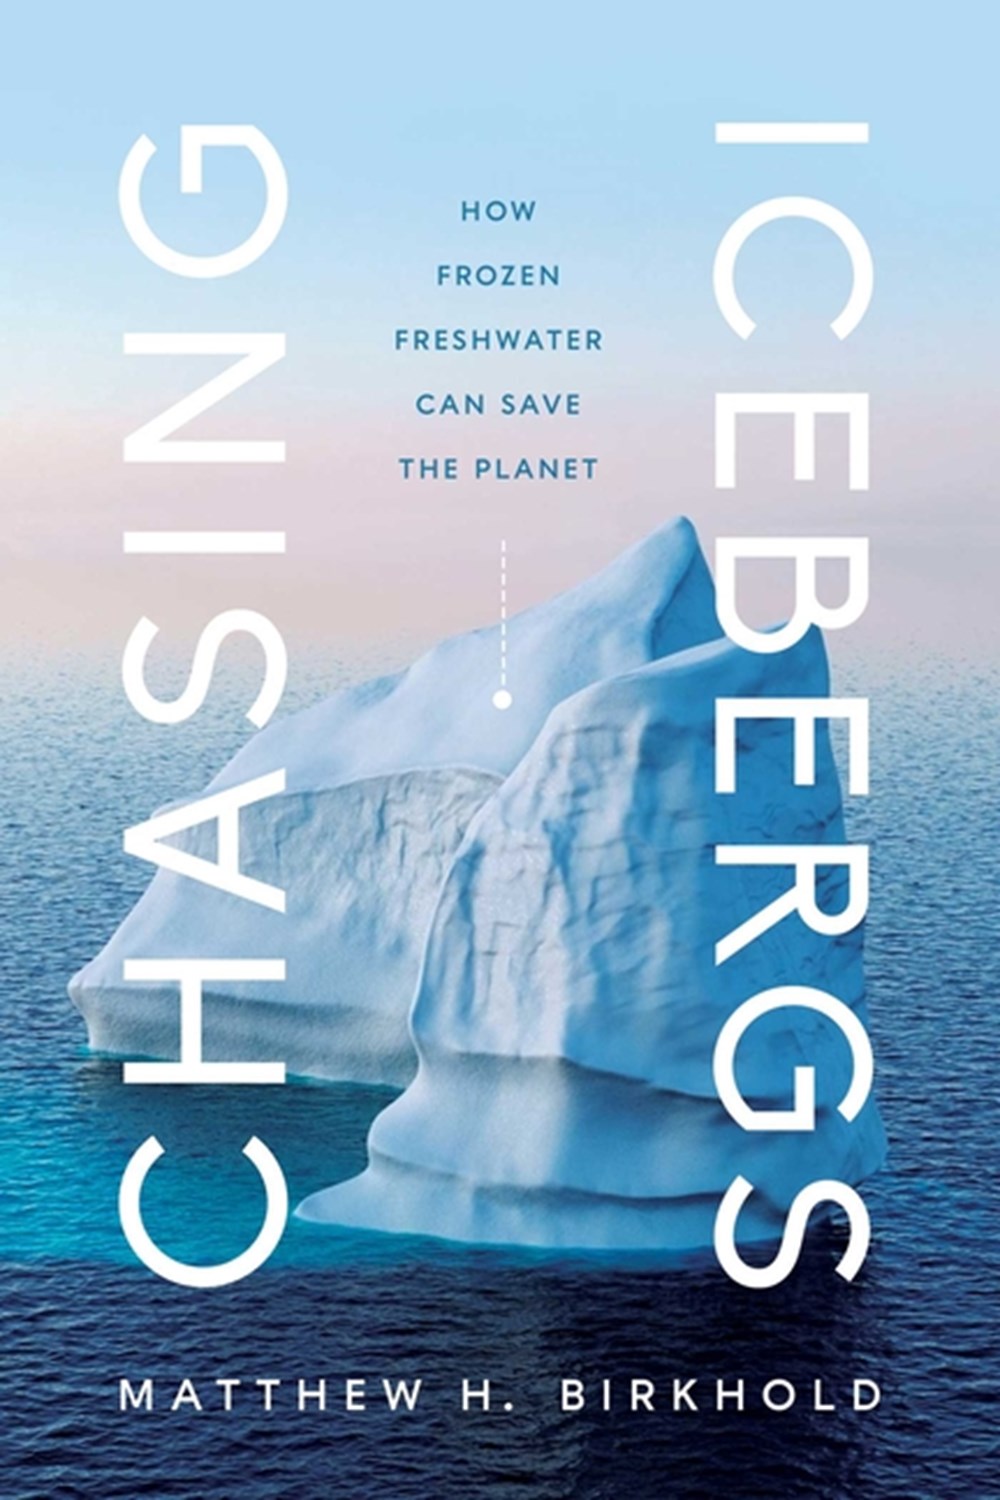 Chasing Icebergs: How Frozen Freshwater Can Save the Planet